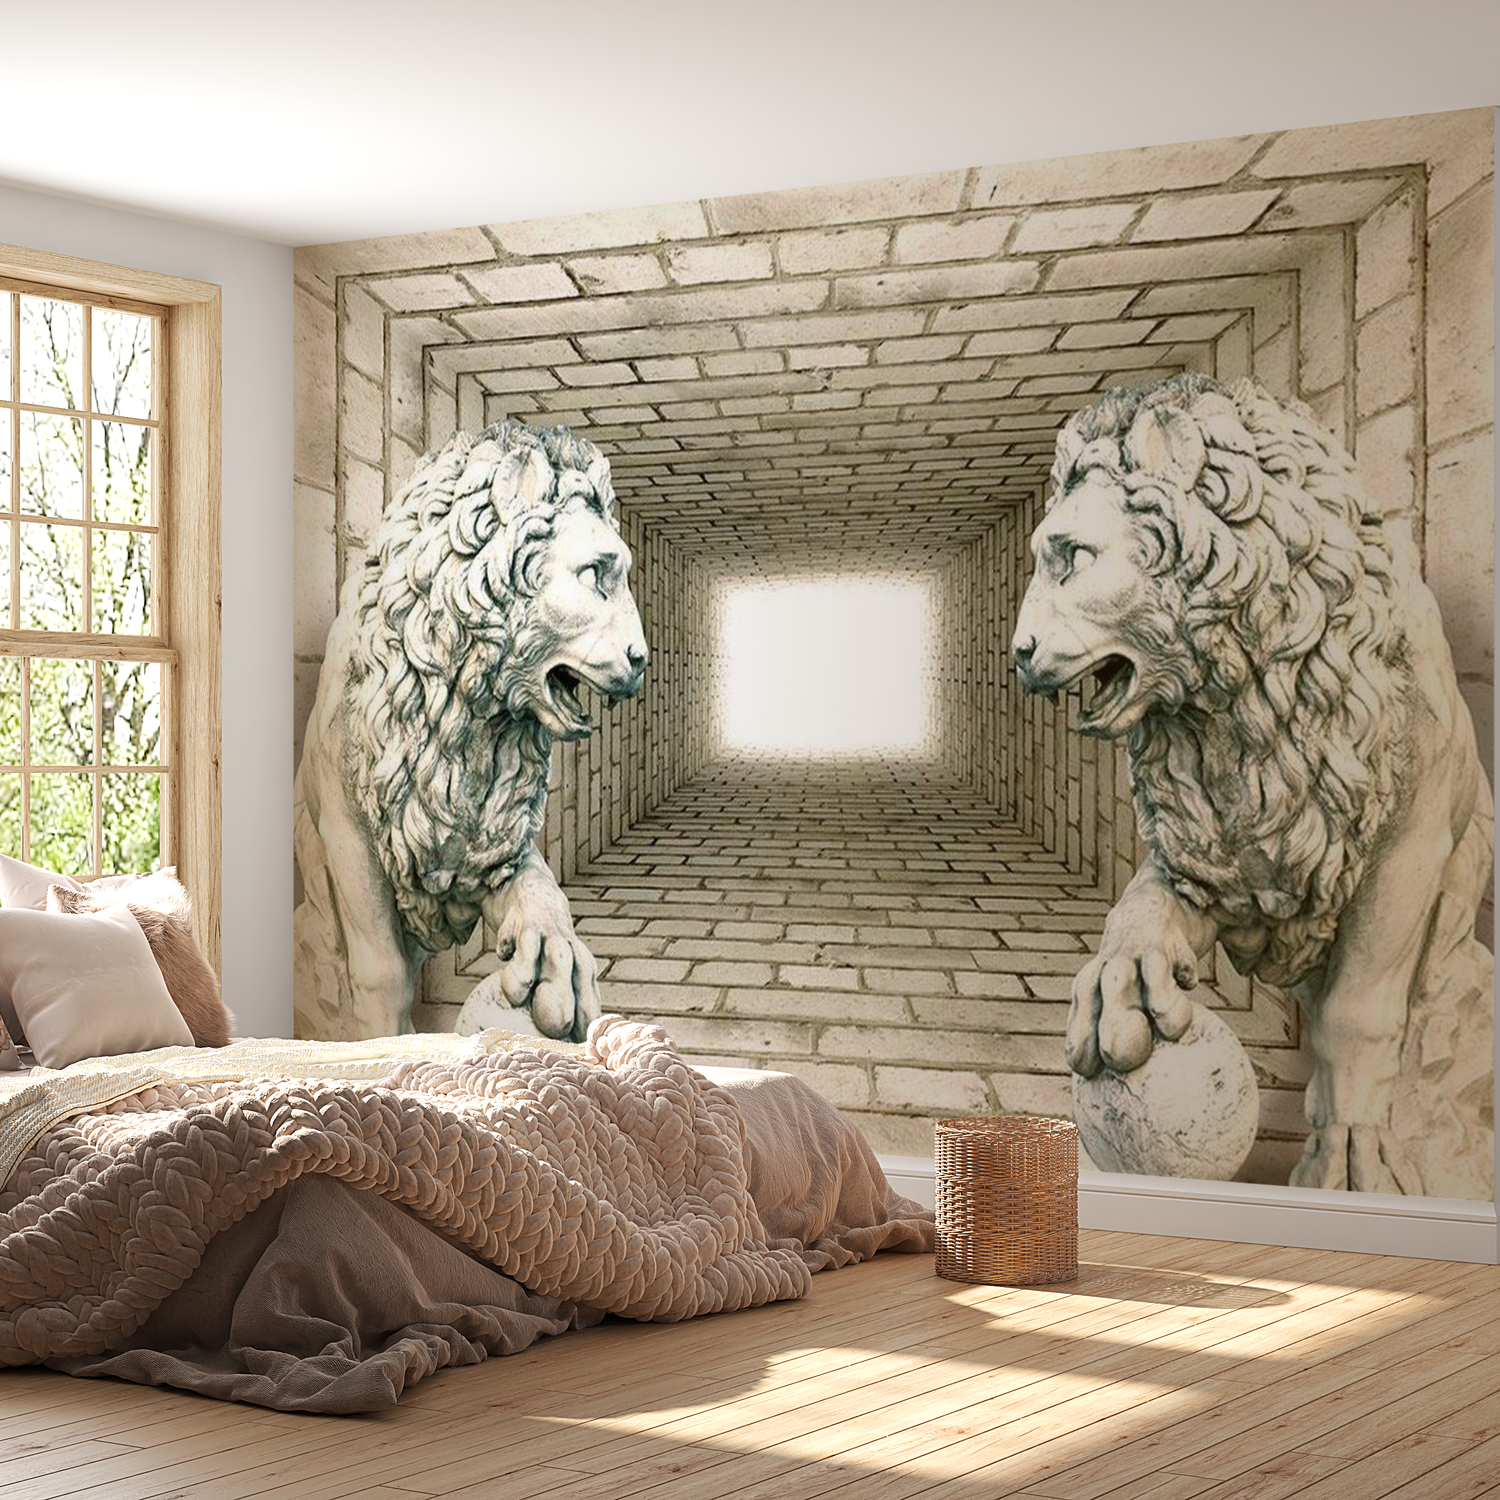 3D Illusion Wallpaper Wall Mural - Chamber Of Lions 39"Wx27"H